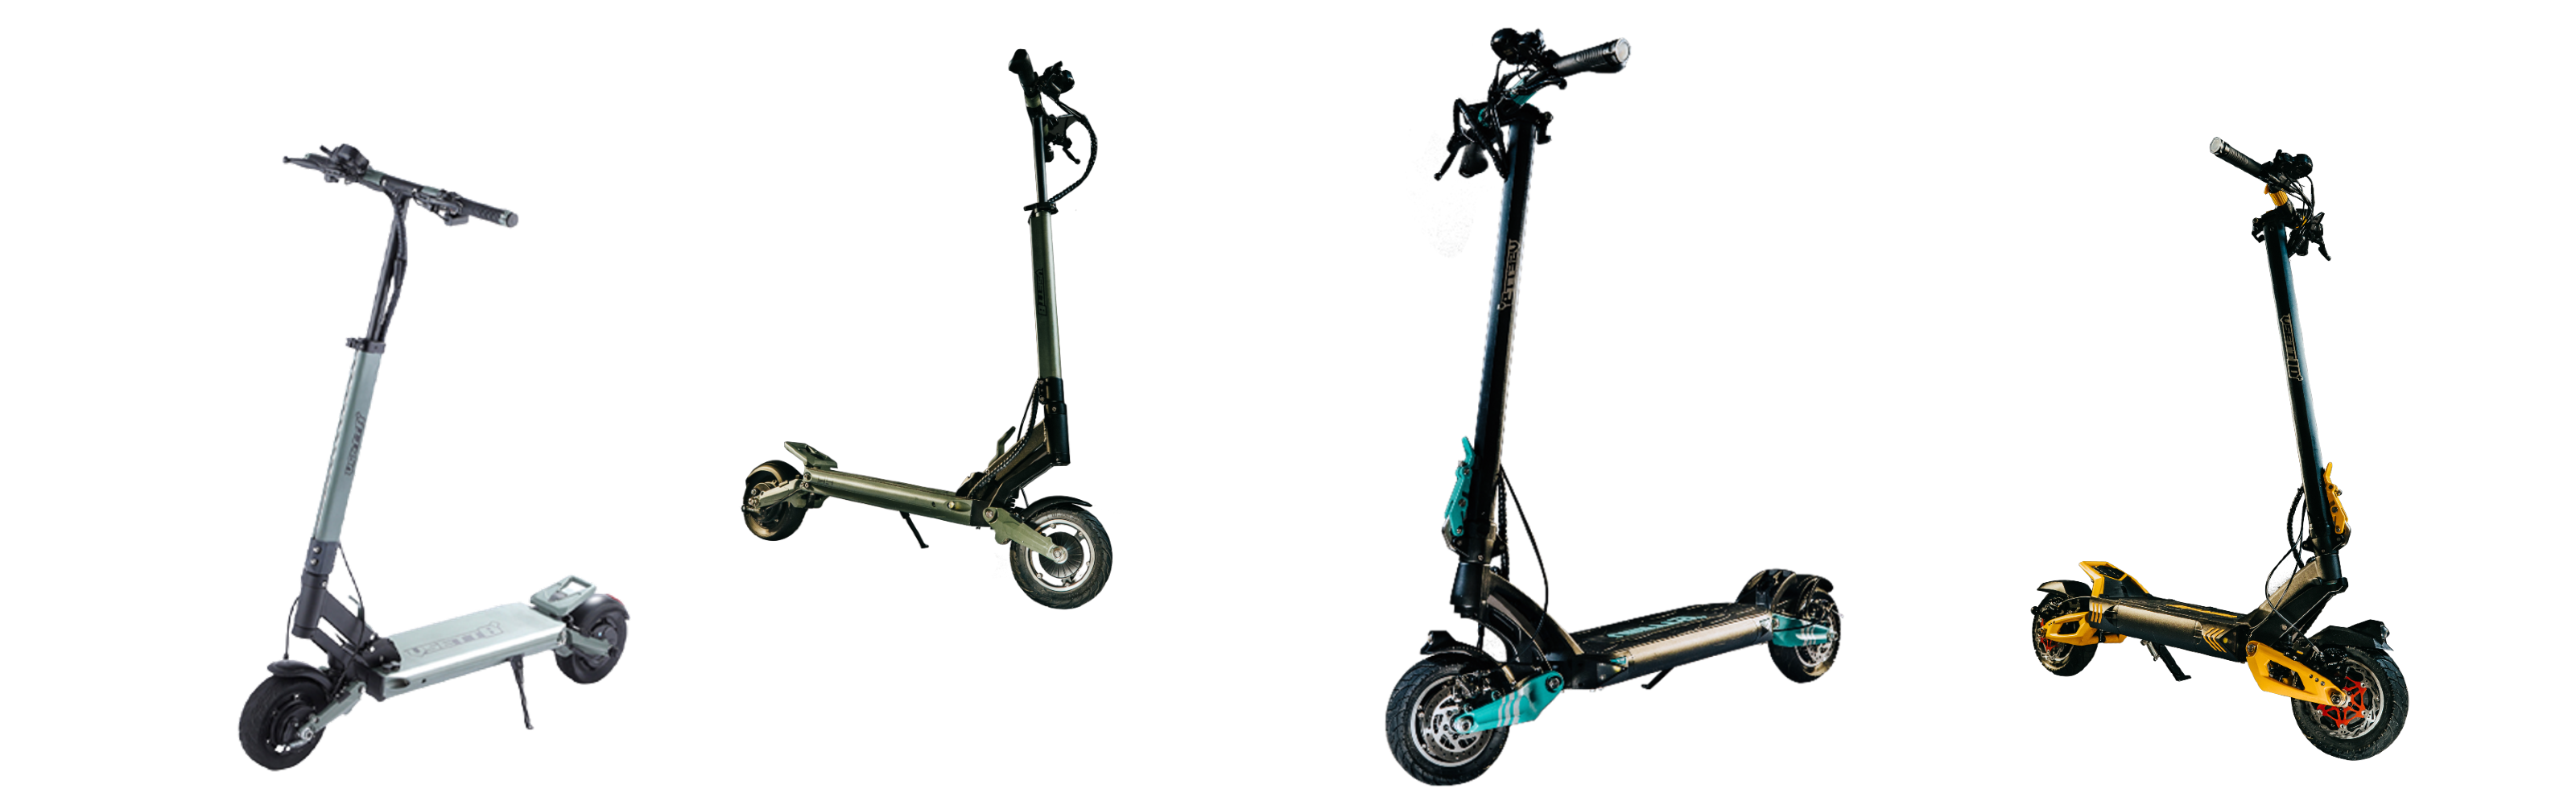 VSETT Electric Scooter Footer Background | Ride and Glide